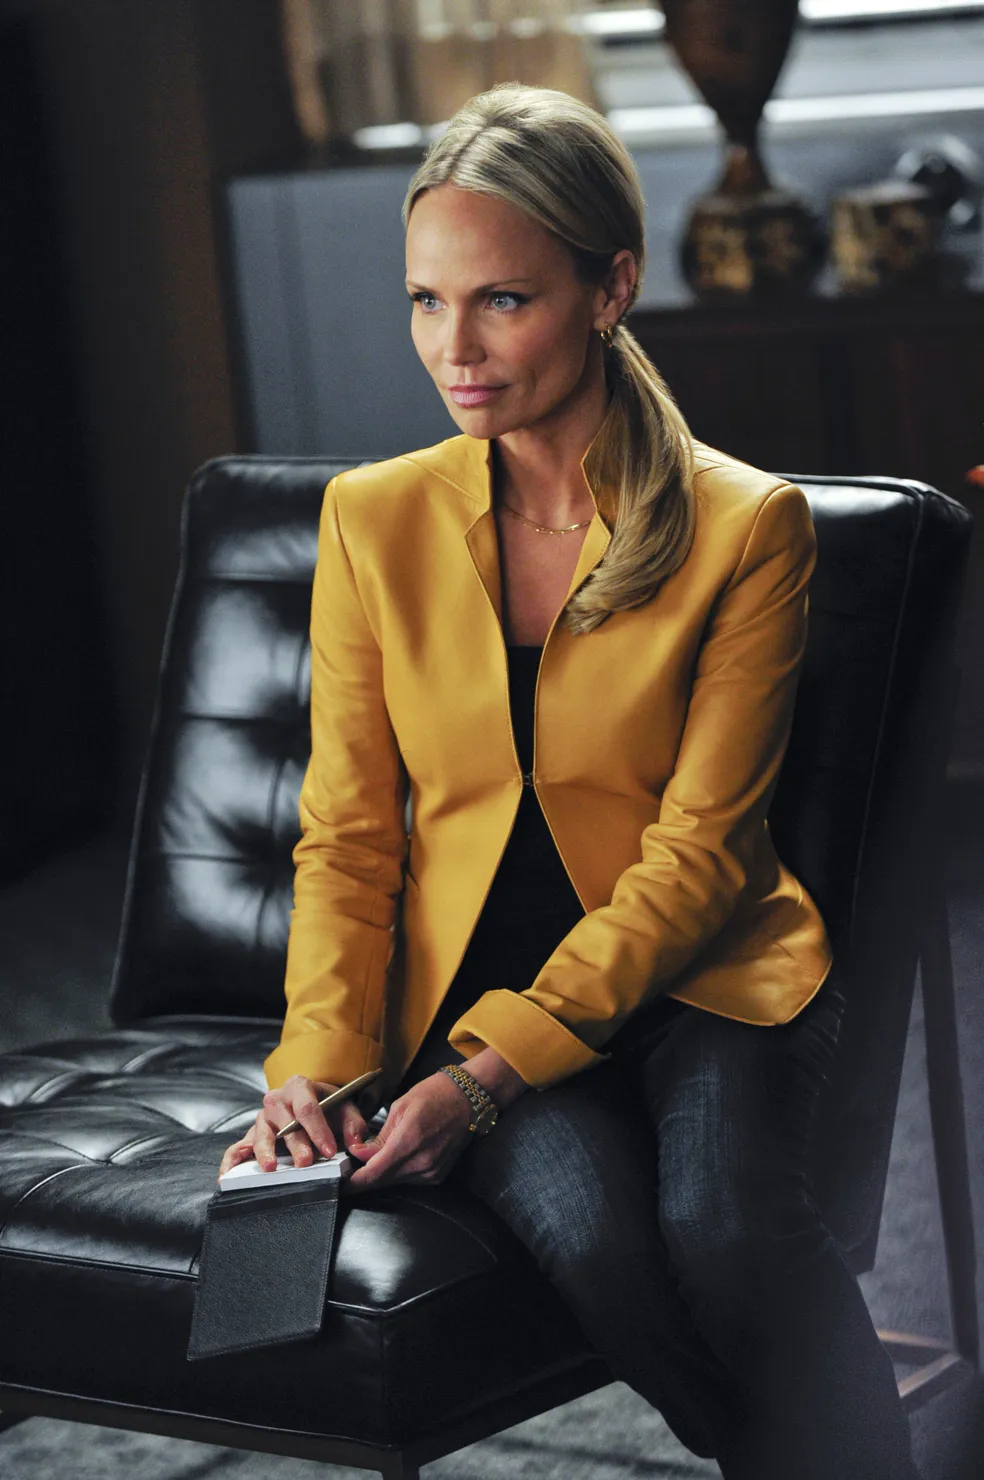 Kristin Chenoweth as Peggy Byrne in The Good Wife (Disclosure)